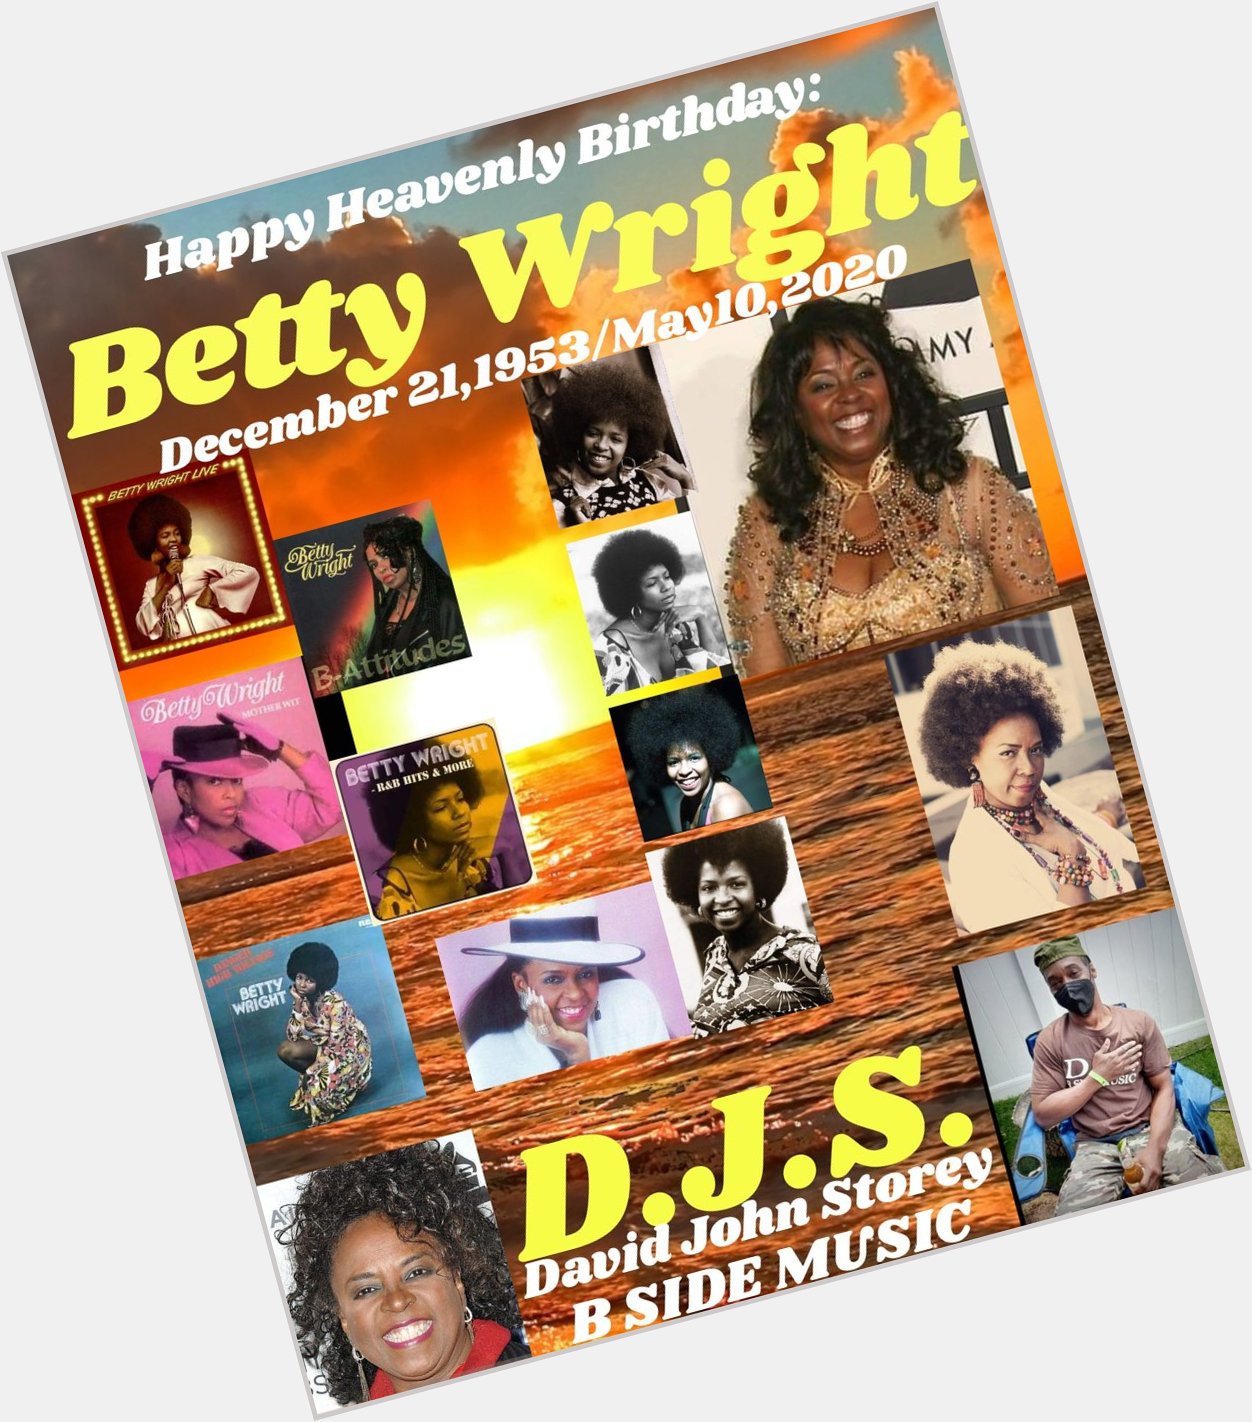 I(D.J.S.)\"B SIDE\"taking time to say Happy Heavenly Birthday to Singer: \"BETTY WRIGHT\". 